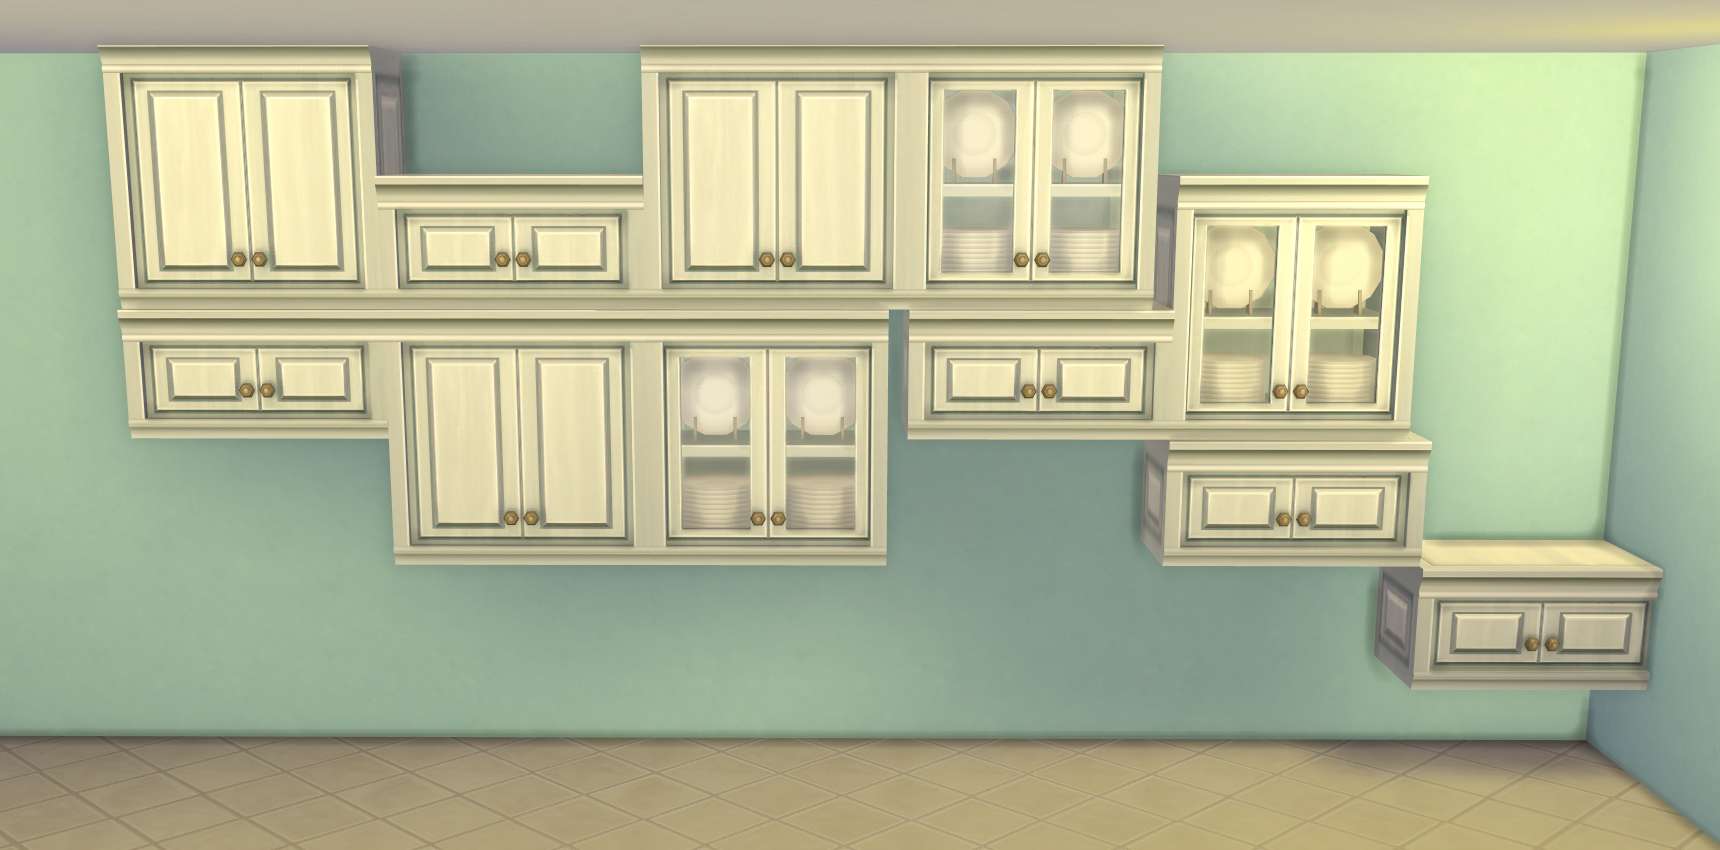 The Sims 4 Building: Counters, Cabinets and Islands